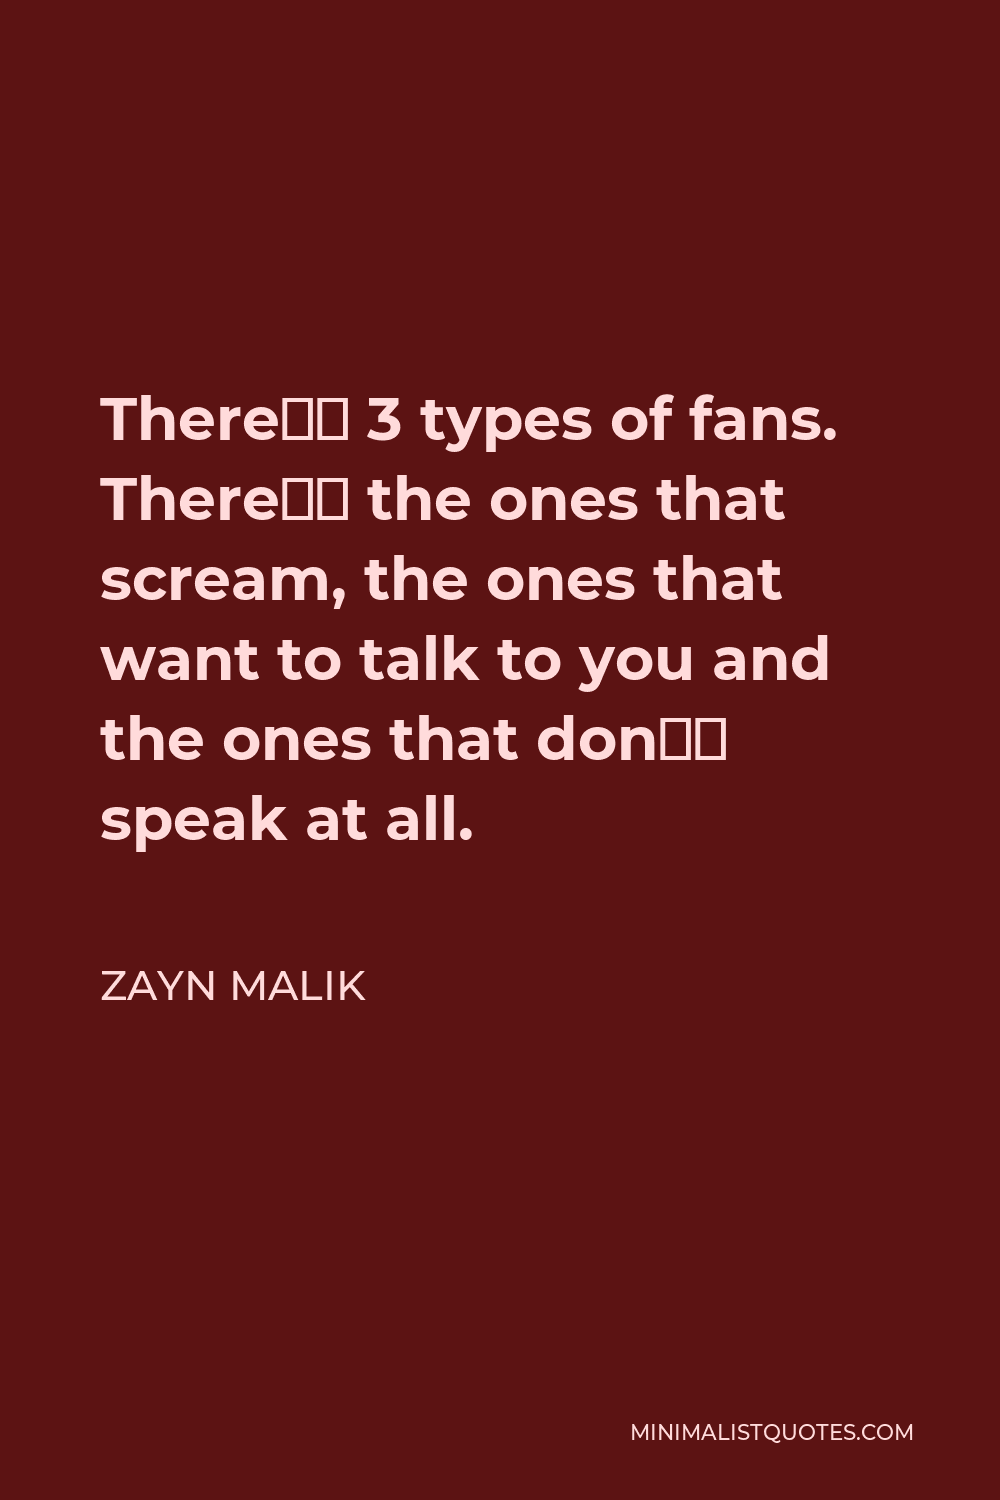 Zayn Malik Quote - There’s 3 types of fans. There’s the ones that scream, the ones that want to talk to you and the ones that don’t speak at all.